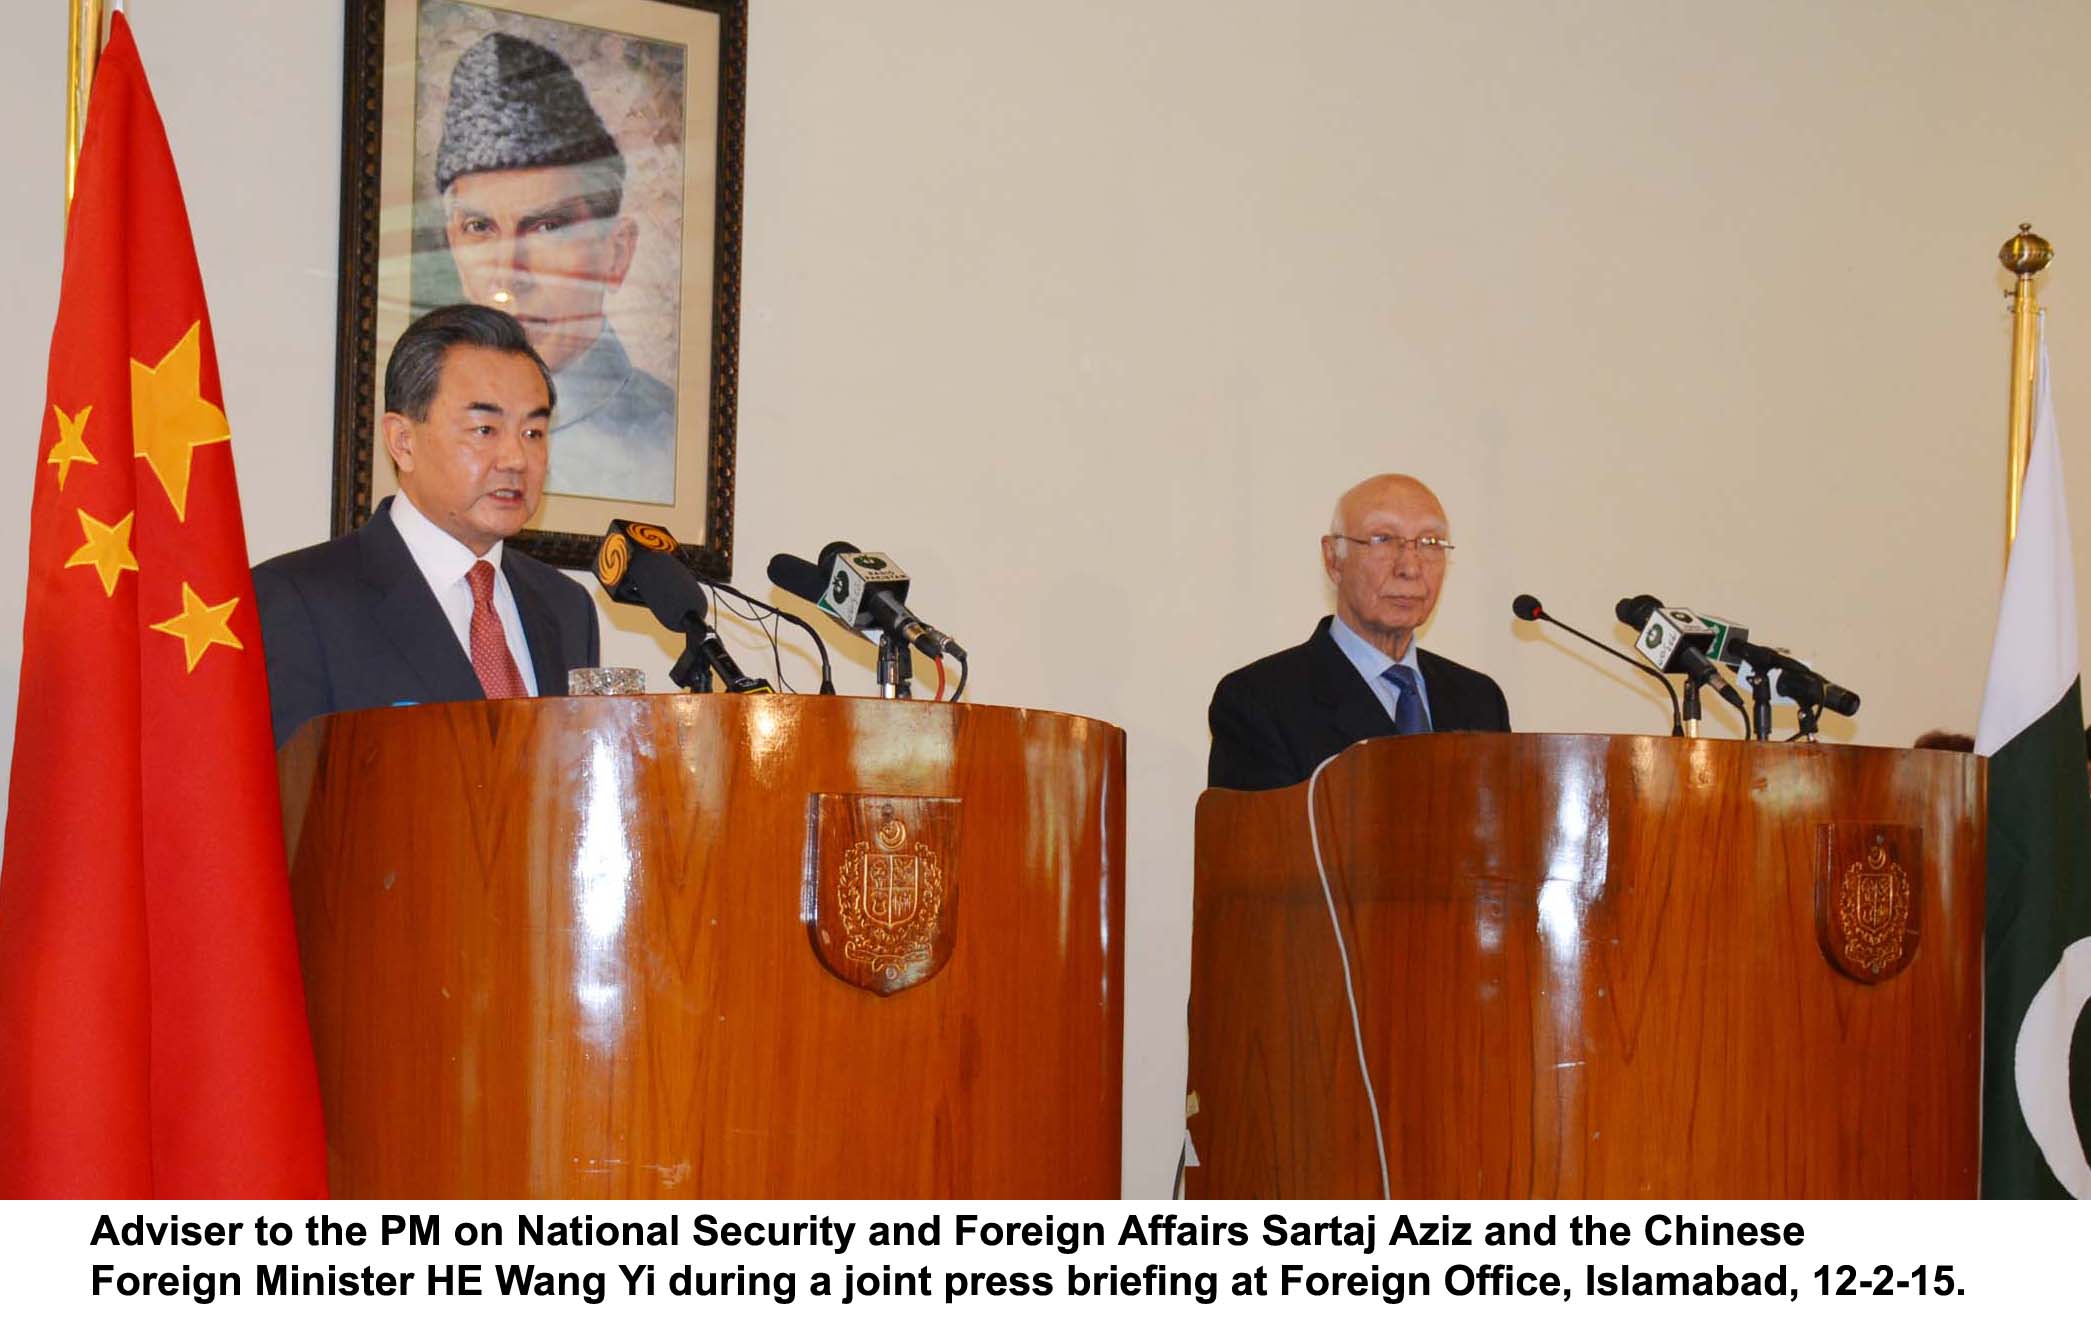 chinese foreign minister wang yi addressing a joint press conference with advisor to pm on national security and foreign affairs sartaj aziz in islamabad photo pid